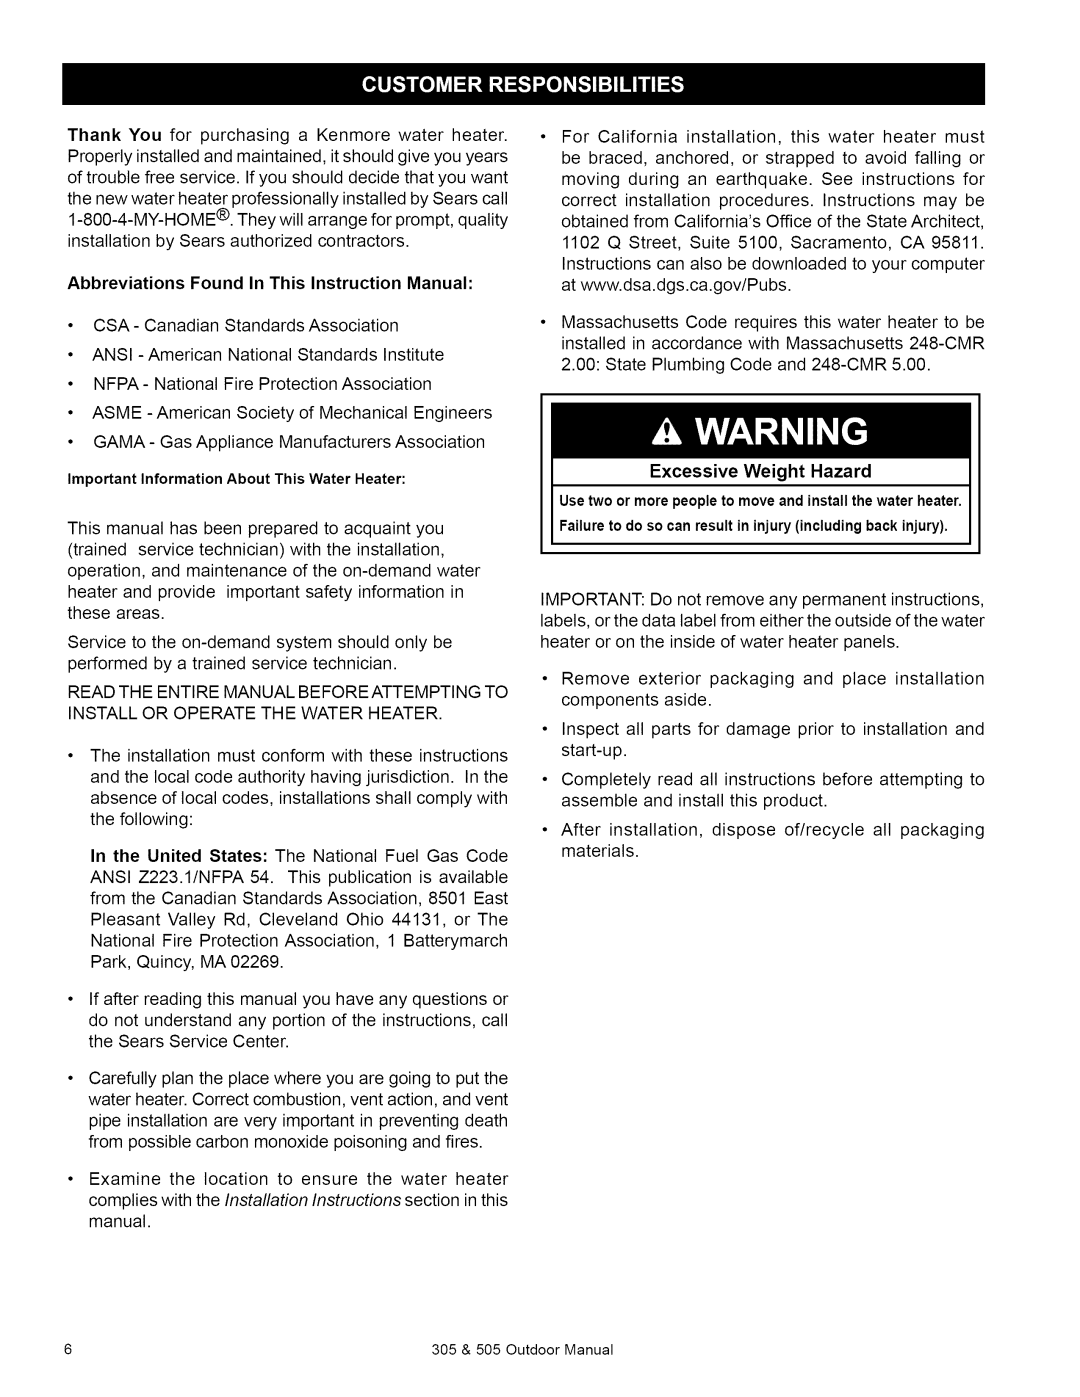 Kenmore 505, 305 owner manual ImportantInformationAbout This Water Heater, Excessive Weight Hazard 